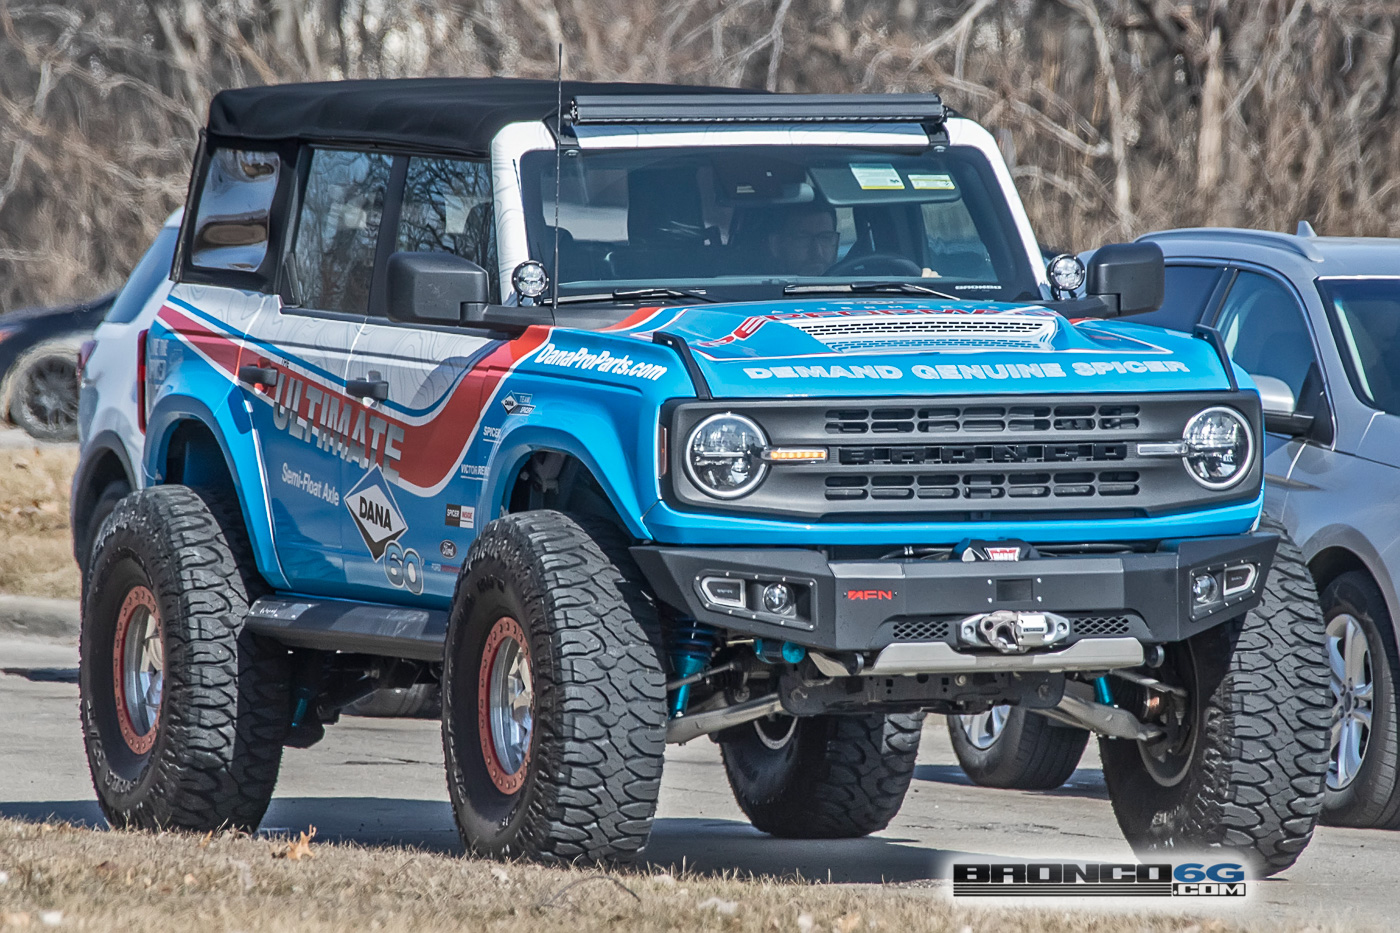 Ford Bronco The "Ultimate Ford Bronco Build" Caught Testing On The Streets Of Dearborn 1062C5D6-64FD-44E9-9377-88D724D7FB44